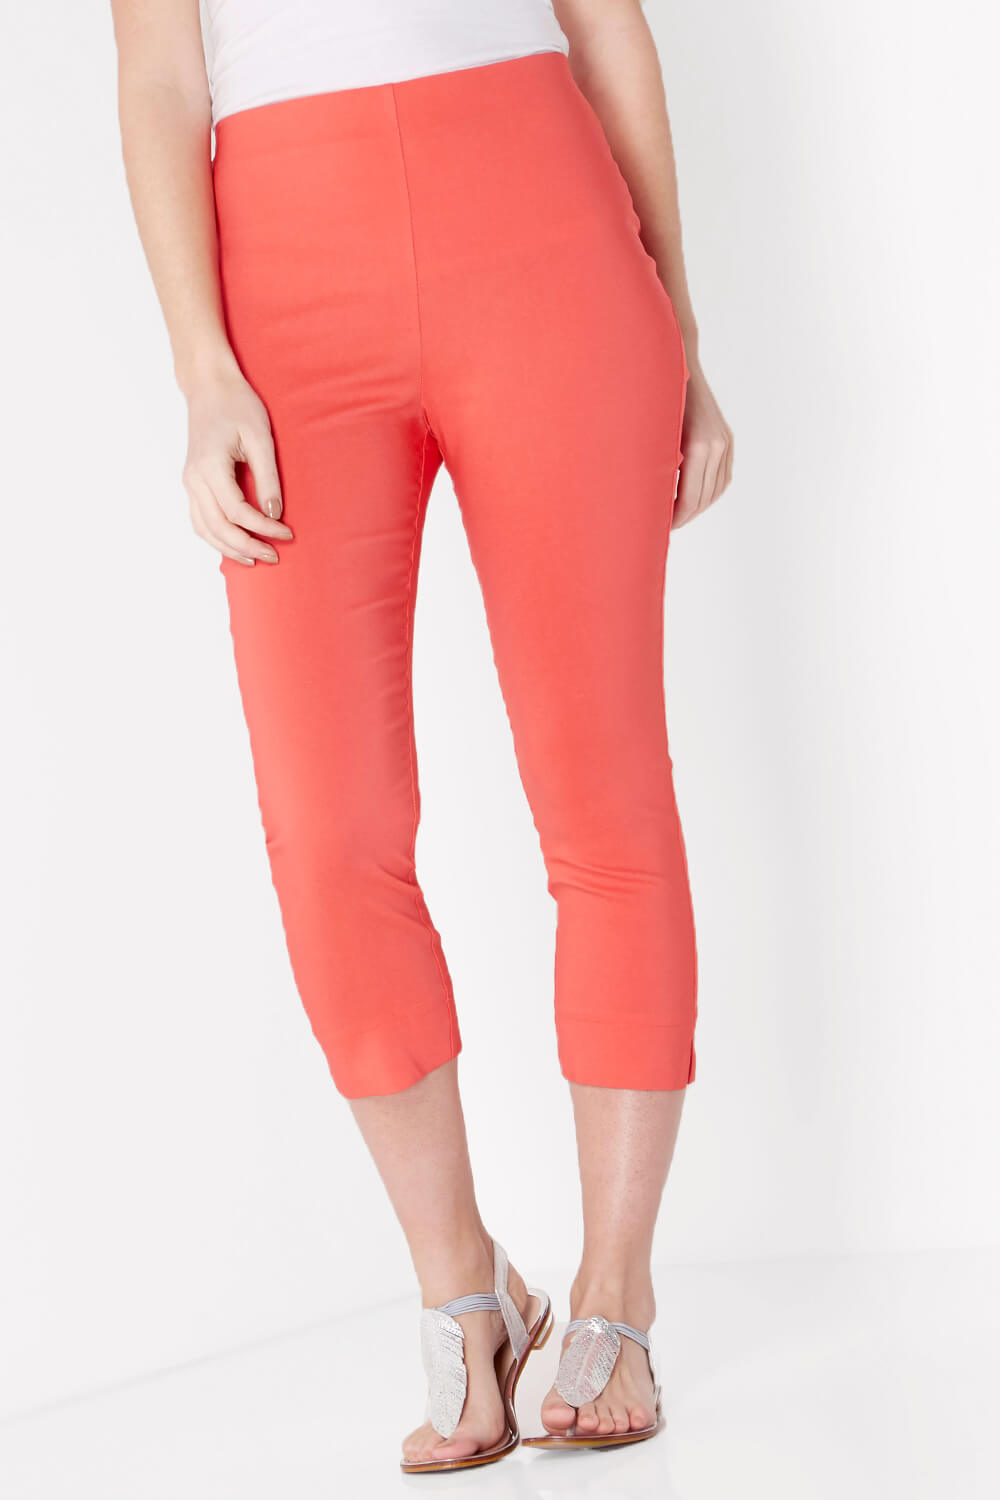 CORAL Cropped Stretch Trouser, Image 2 of 5